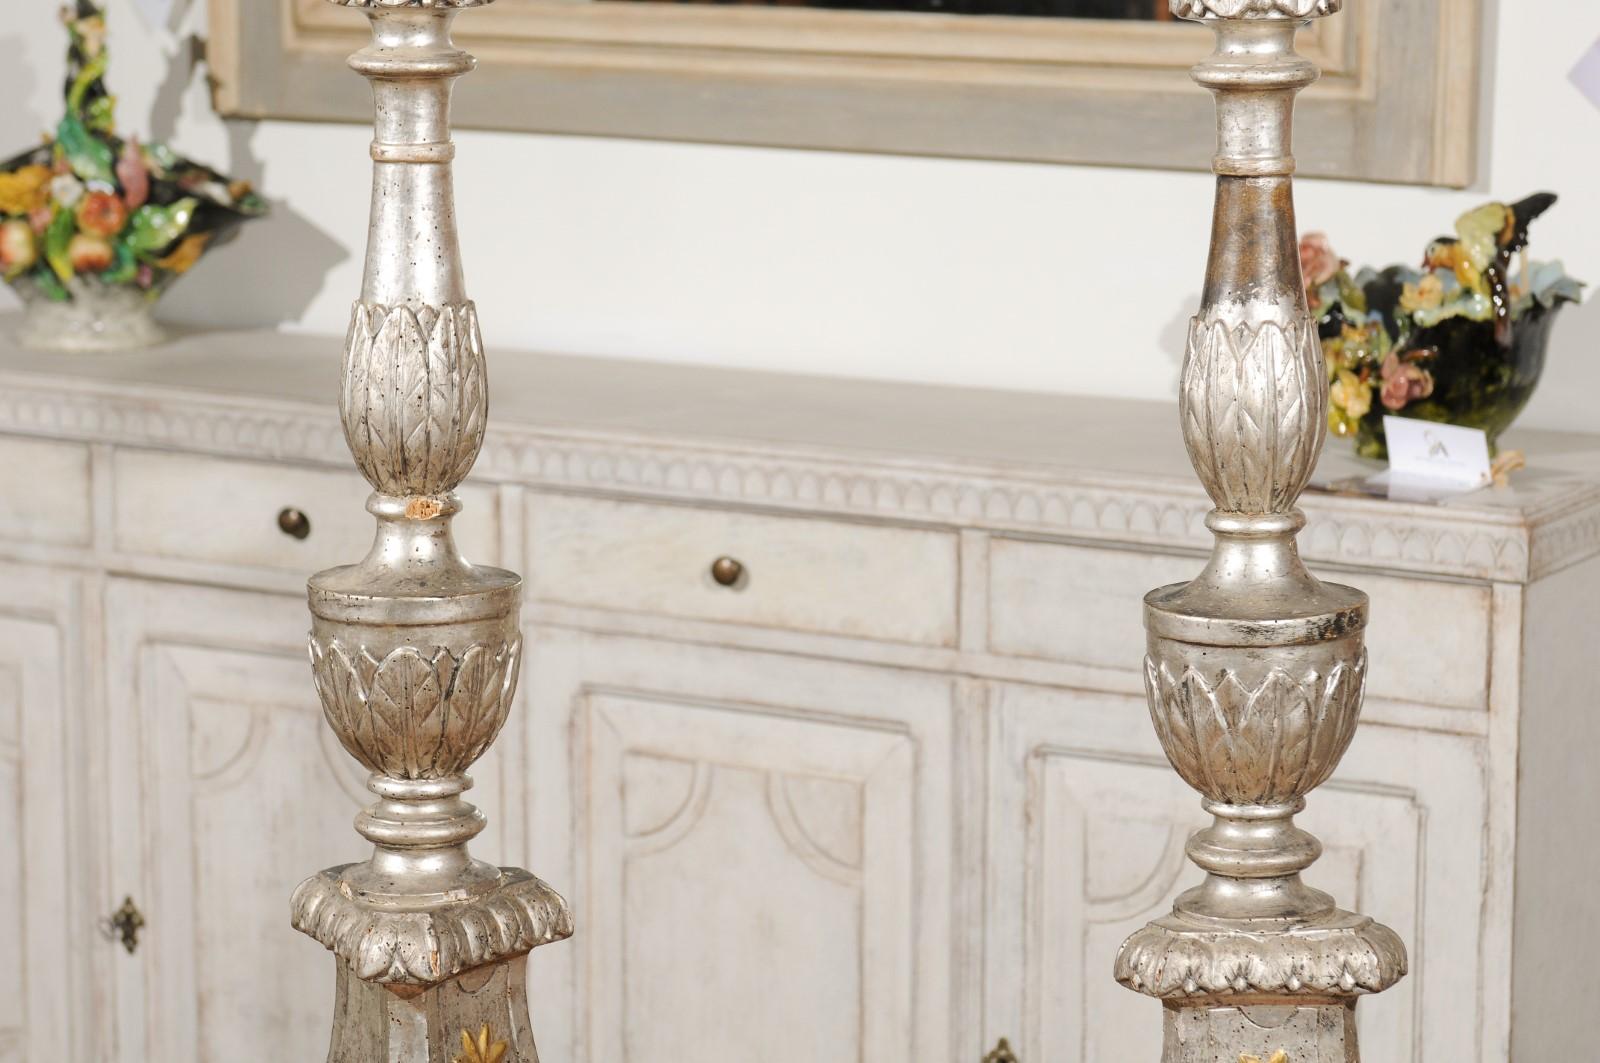 Pair of Italian 18th Century Silver Candlesticks with Gilt Star and Waterleaves In Good Condition For Sale In Atlanta, GA